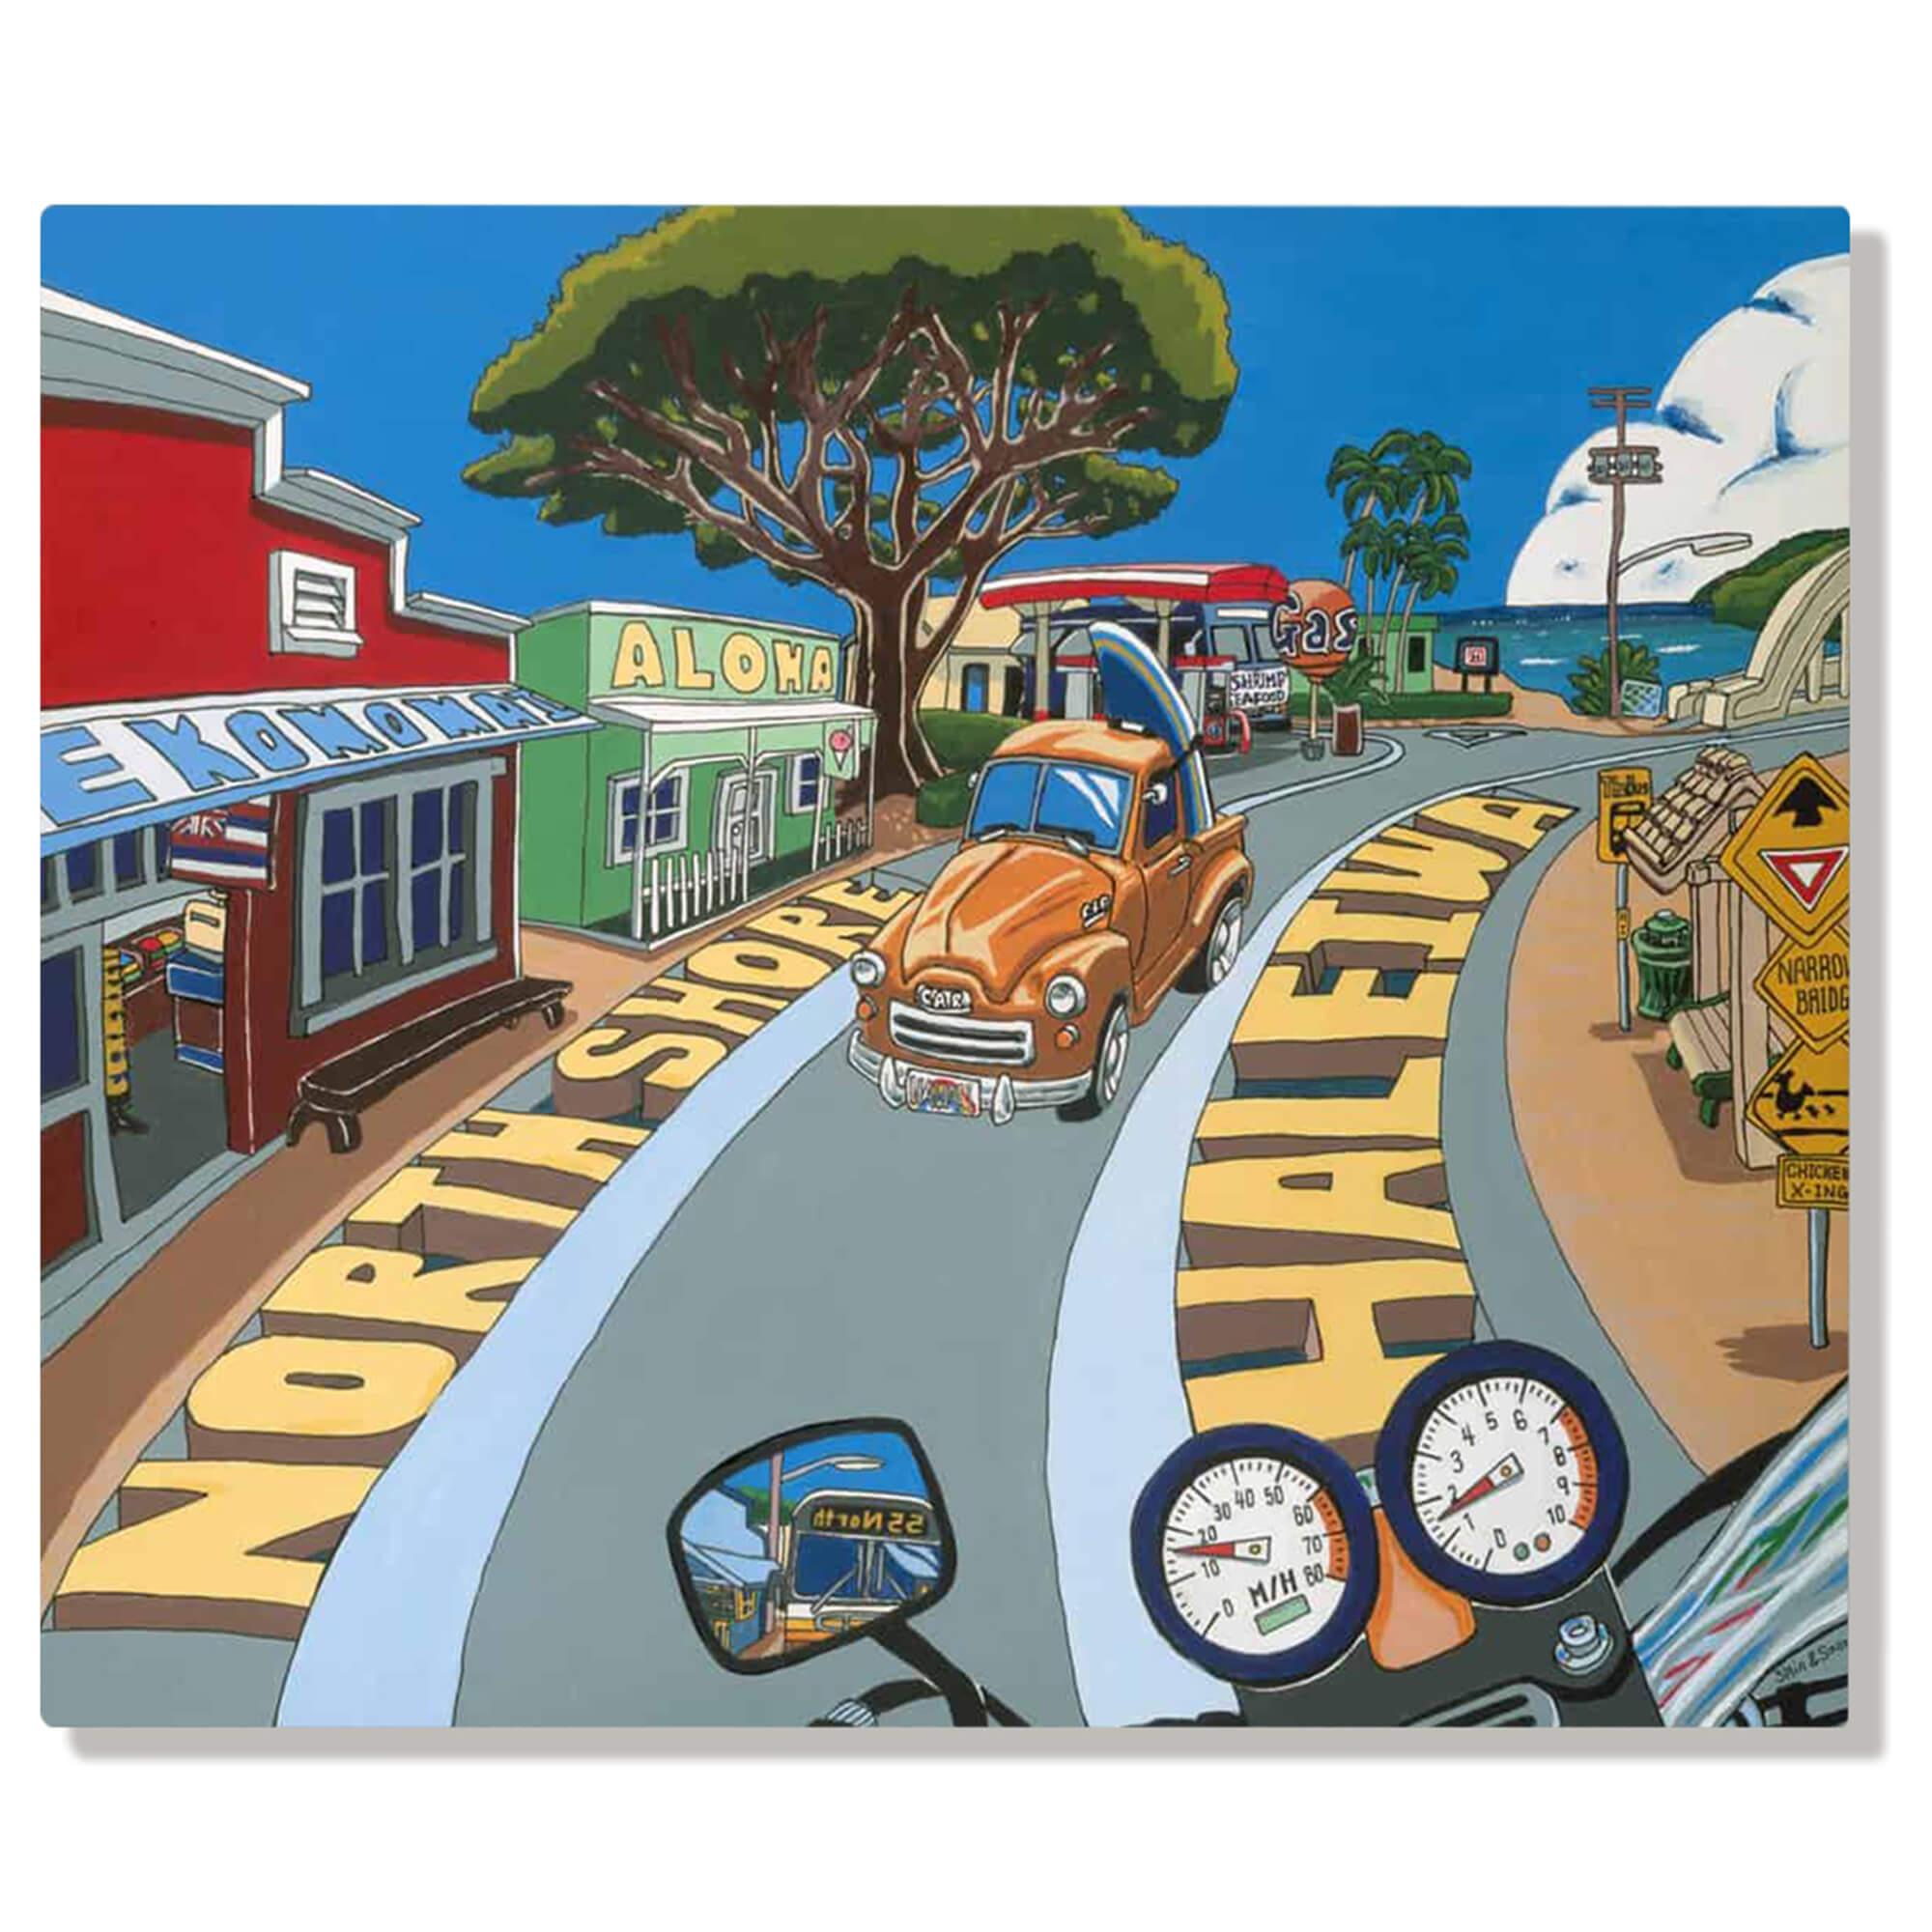 A metal art print of the quaint shops lining the two-way road in the famed town of Haleiwa on the North Shore of Oahu by Hawaii artist Shin Kato